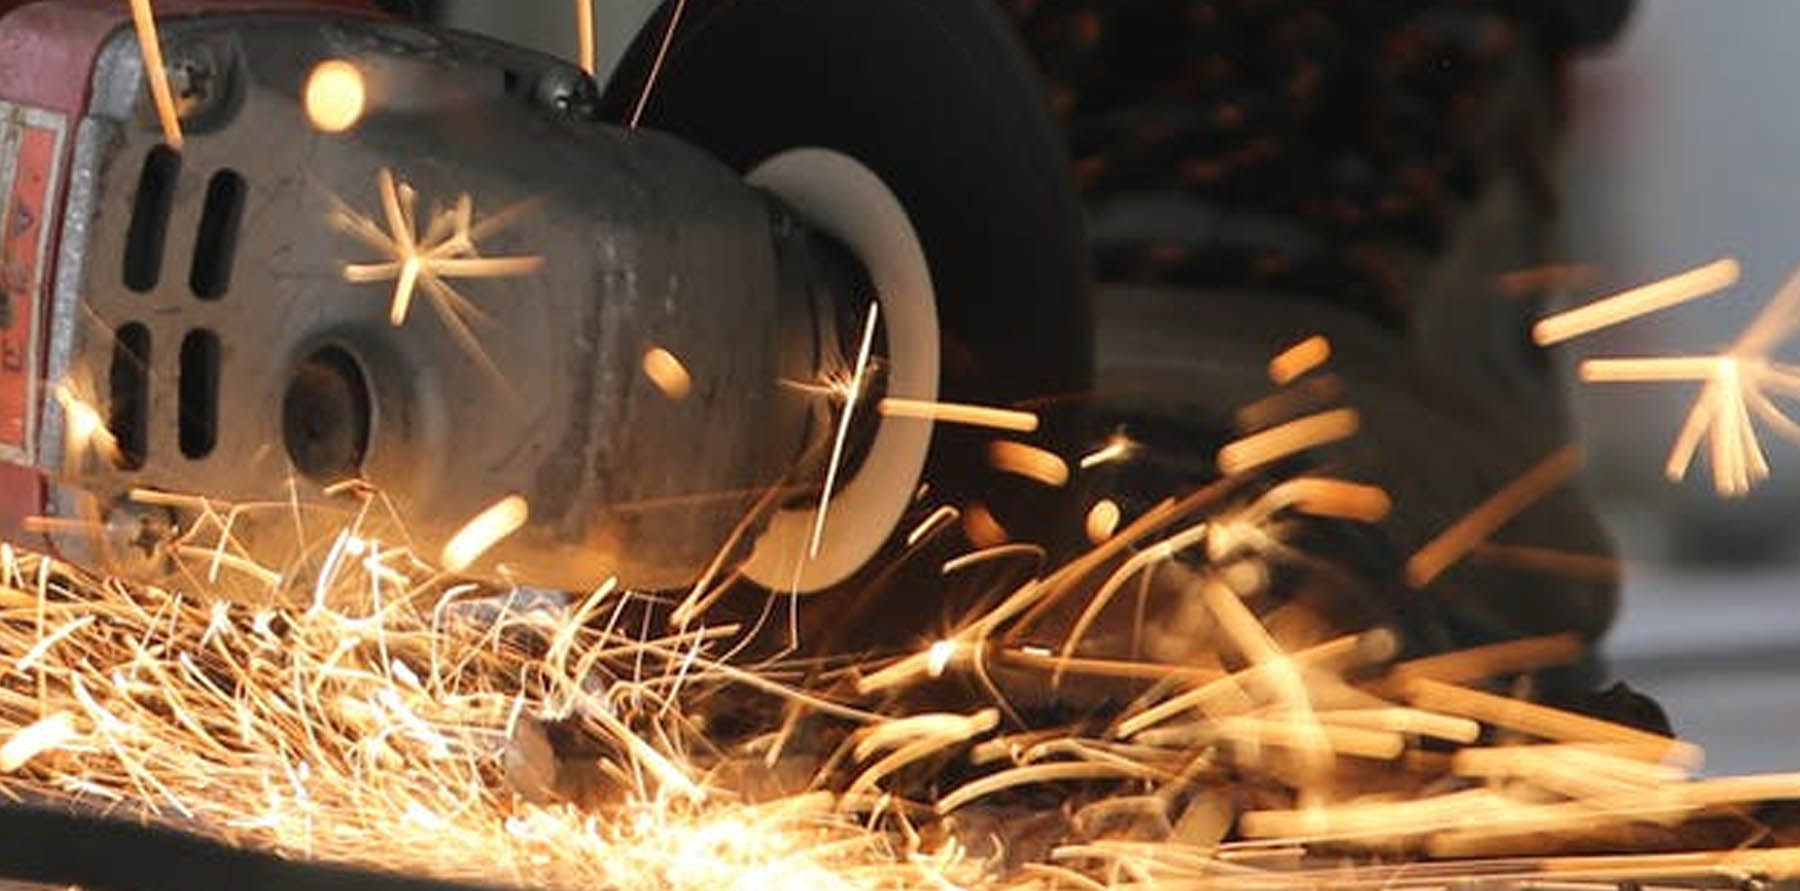 Do you show your Angle Grinder enough respect? - News